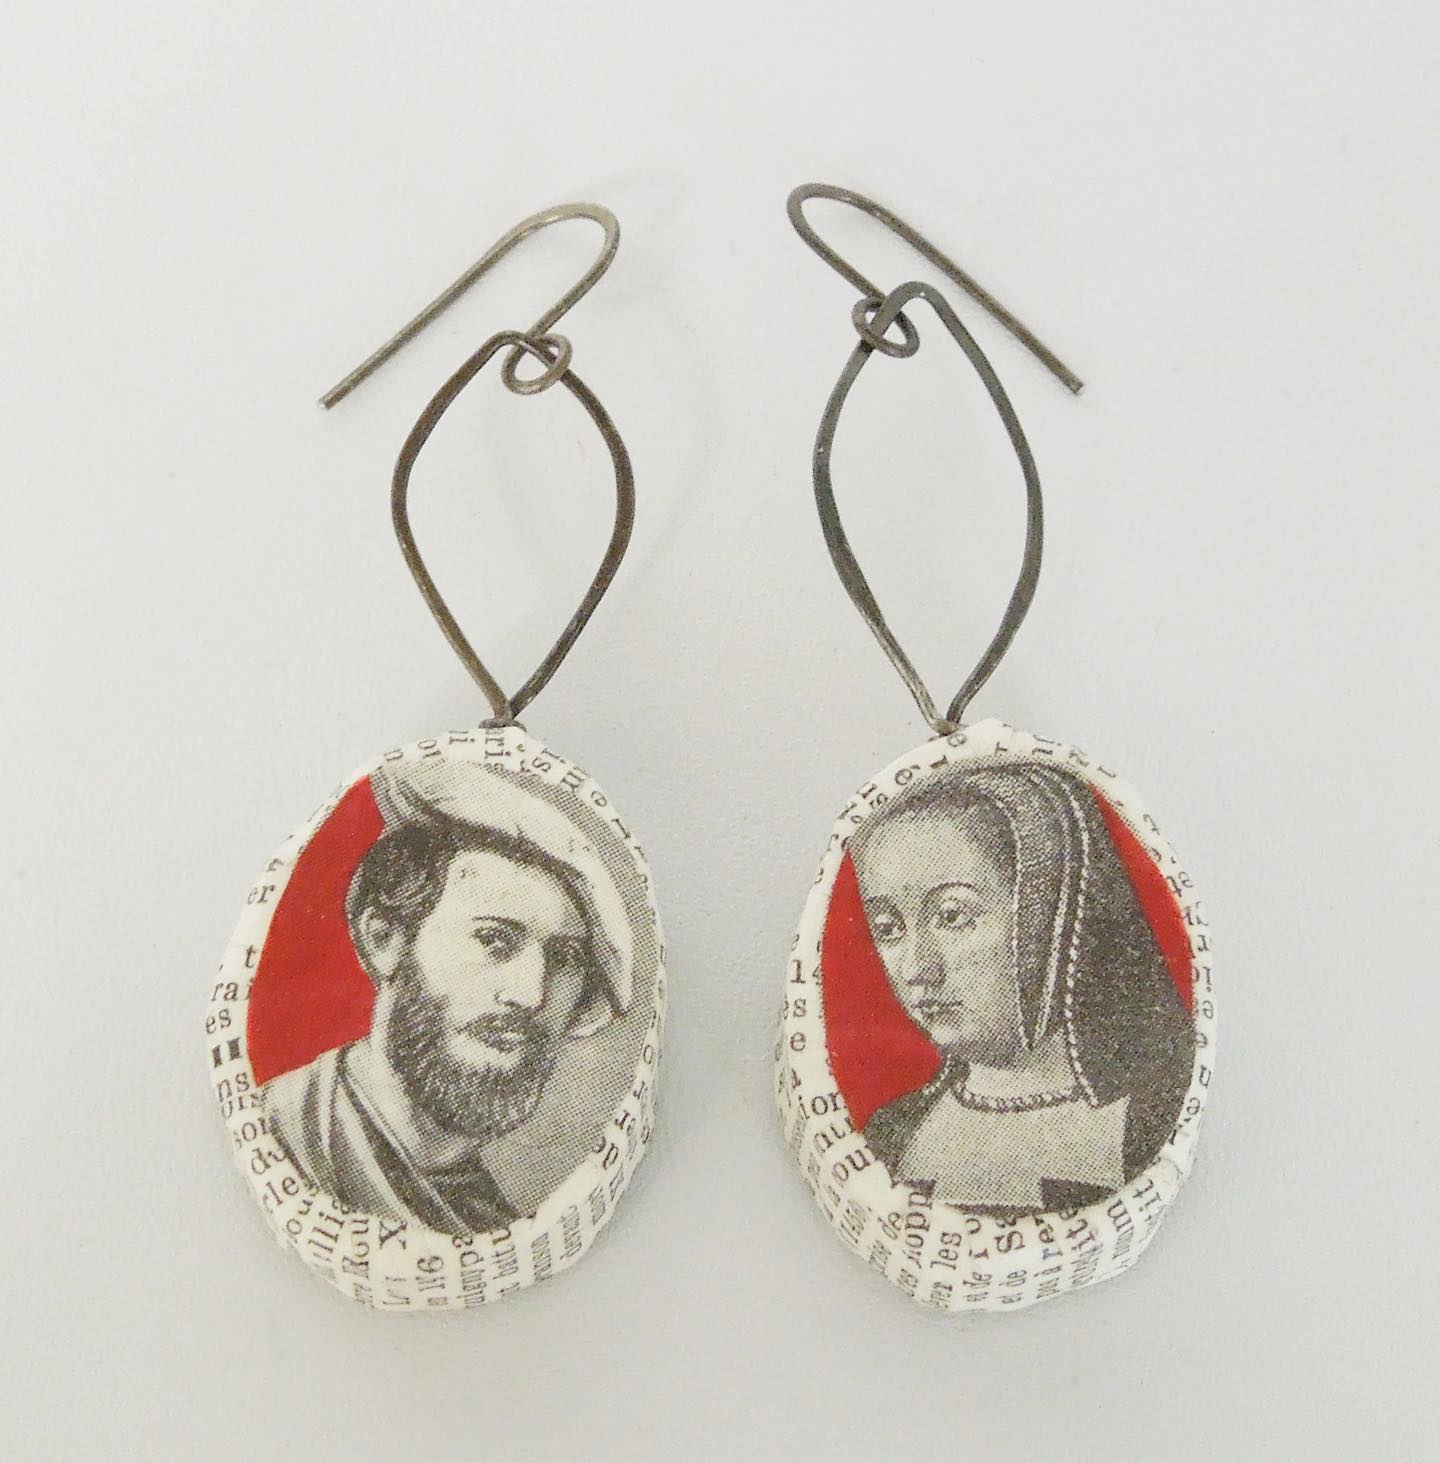 French Dictionary Portrait Earrings by Sally Prangley